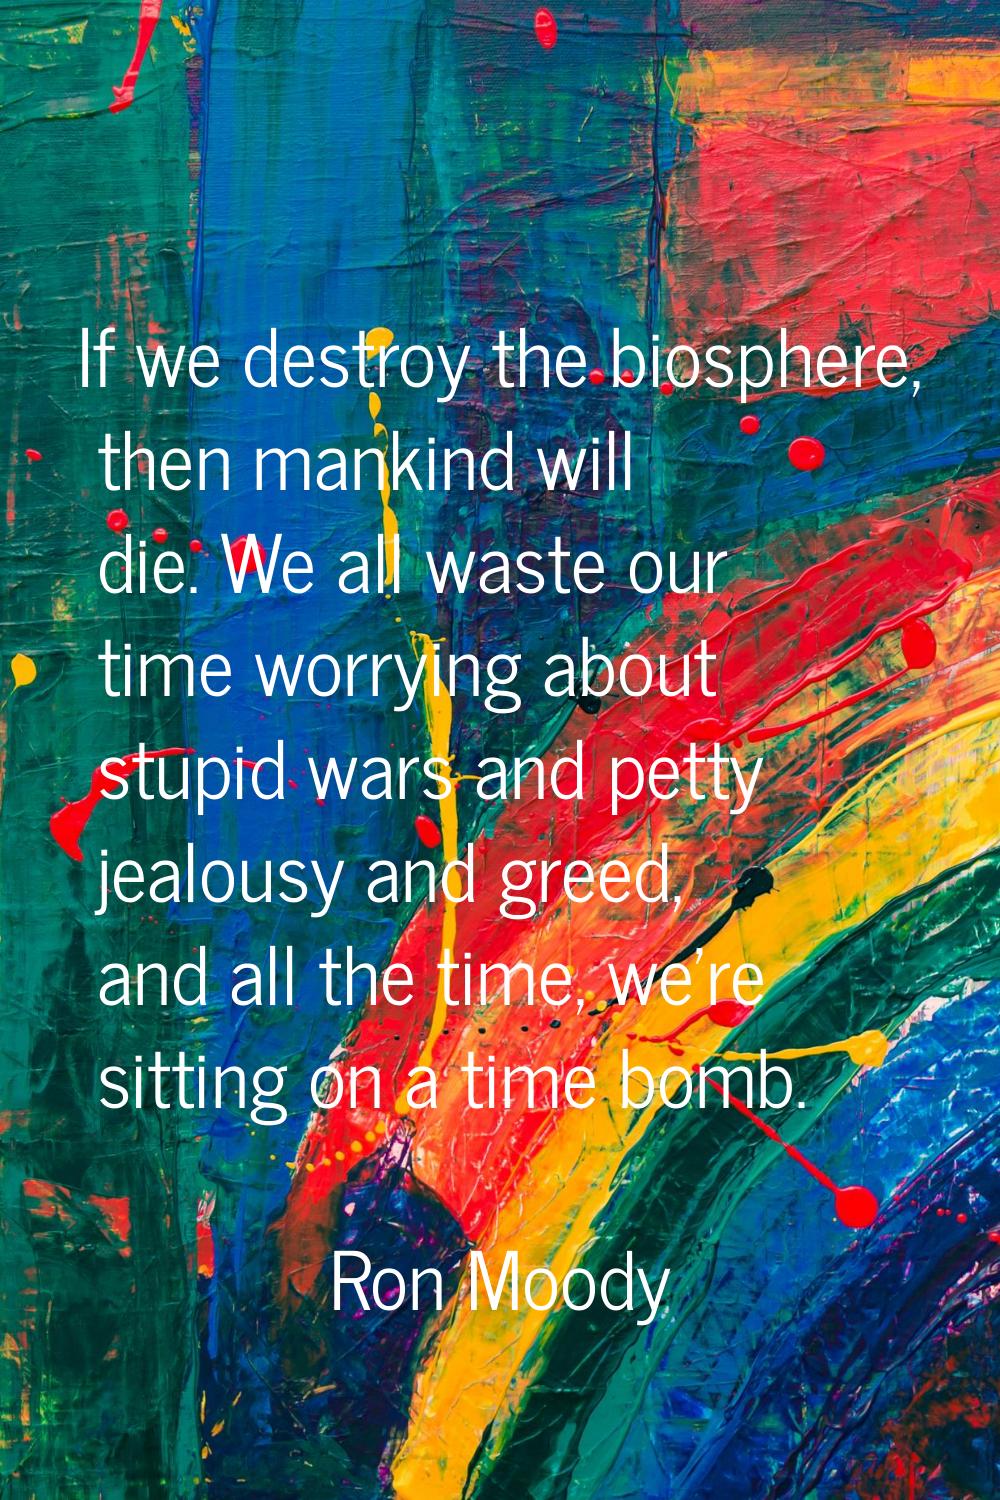 If we destroy the biosphere, then mankind will die. We all waste our time worrying about stupid war